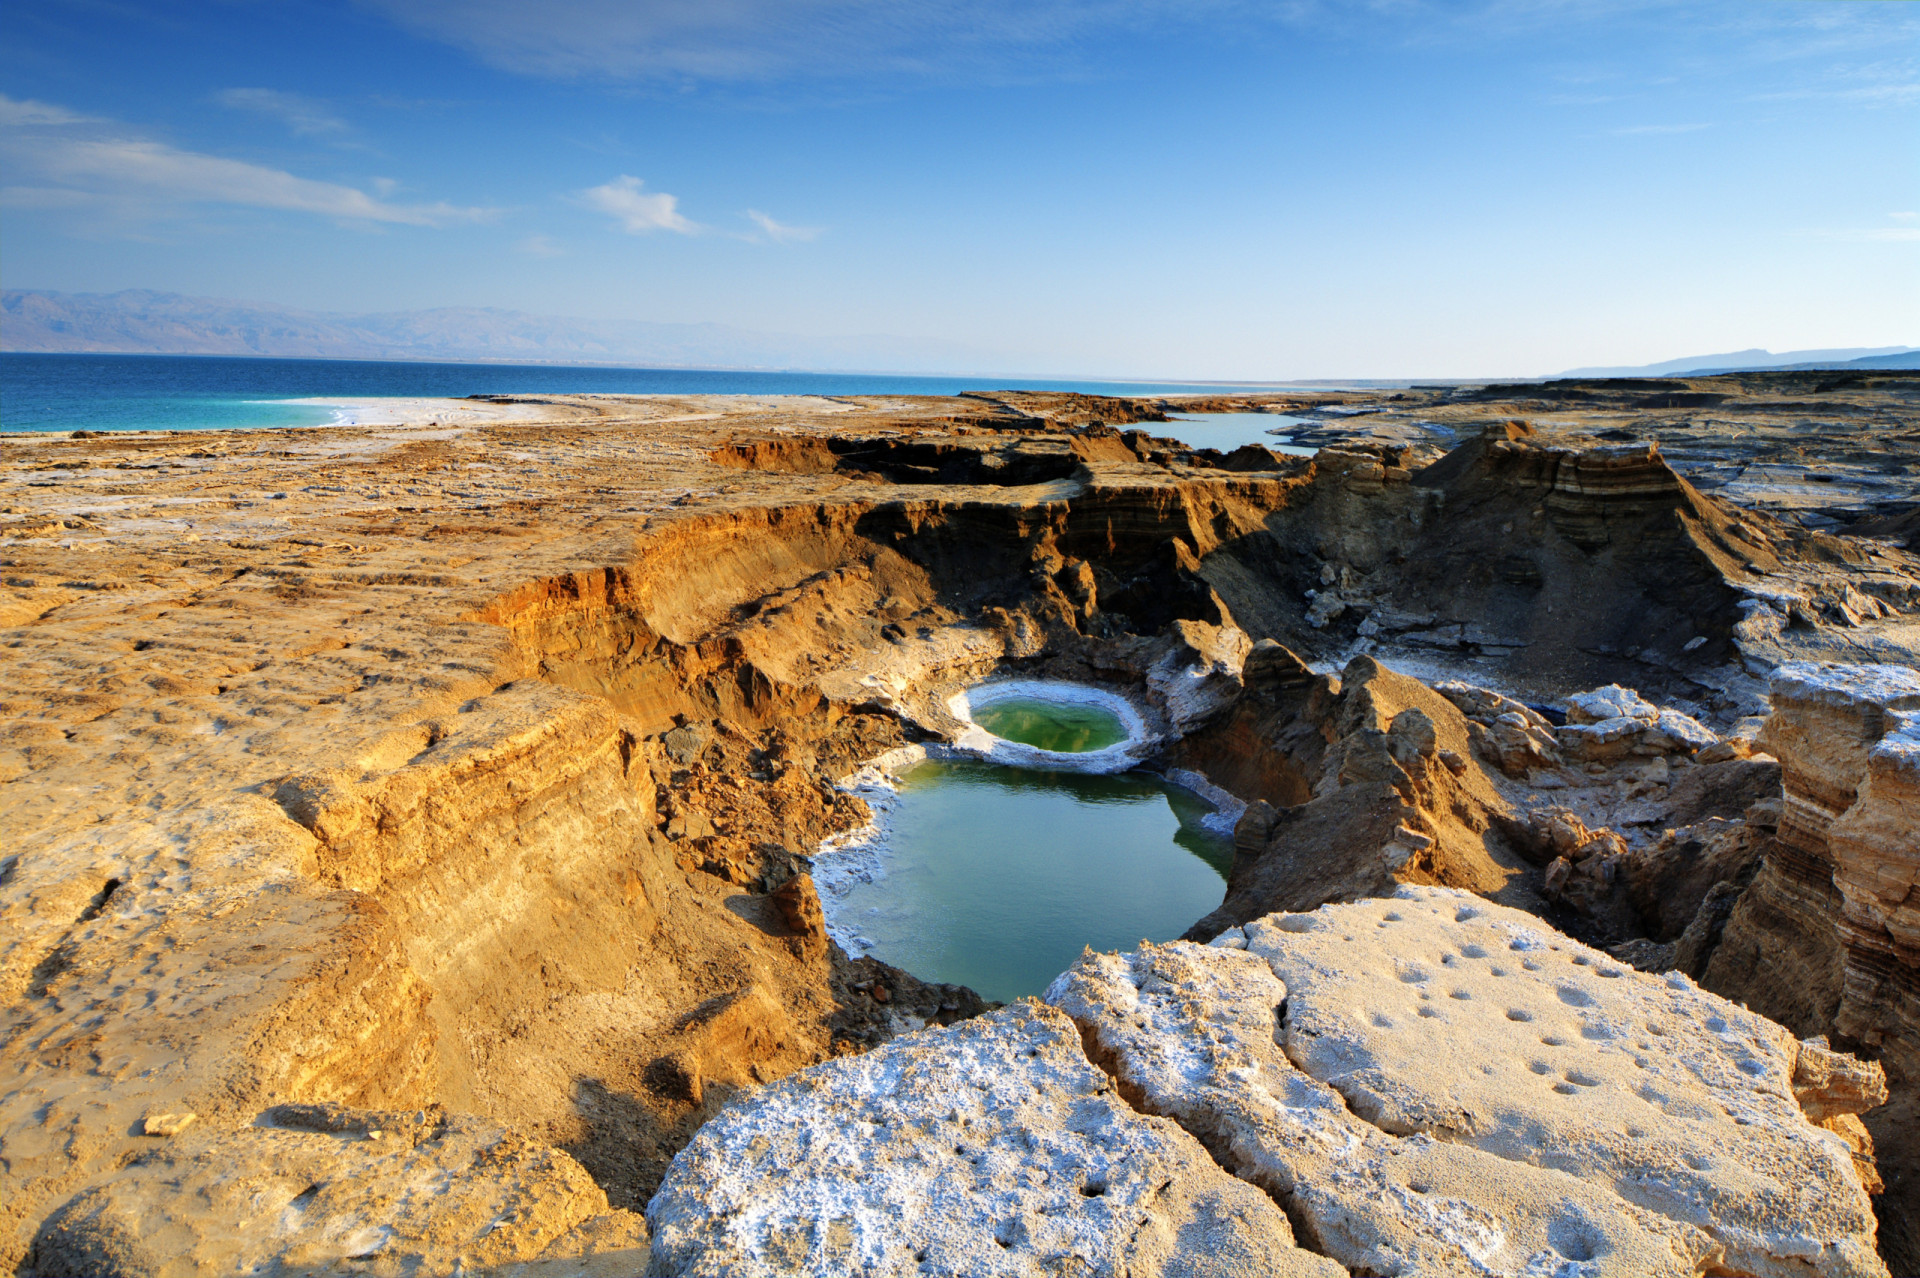 <p>This rapidly dwindling body of water has revealed numerous brackish sinkholes along the Dead Sea coast.</p><p>You may also like:<a href="https://www.starsinsider.com/n/284535?utm_source=msn.com&utm_medium=display&utm_campaign=referral_description&utm_content=573453en-en"> Ride down the longest roads on Earth</a></p>